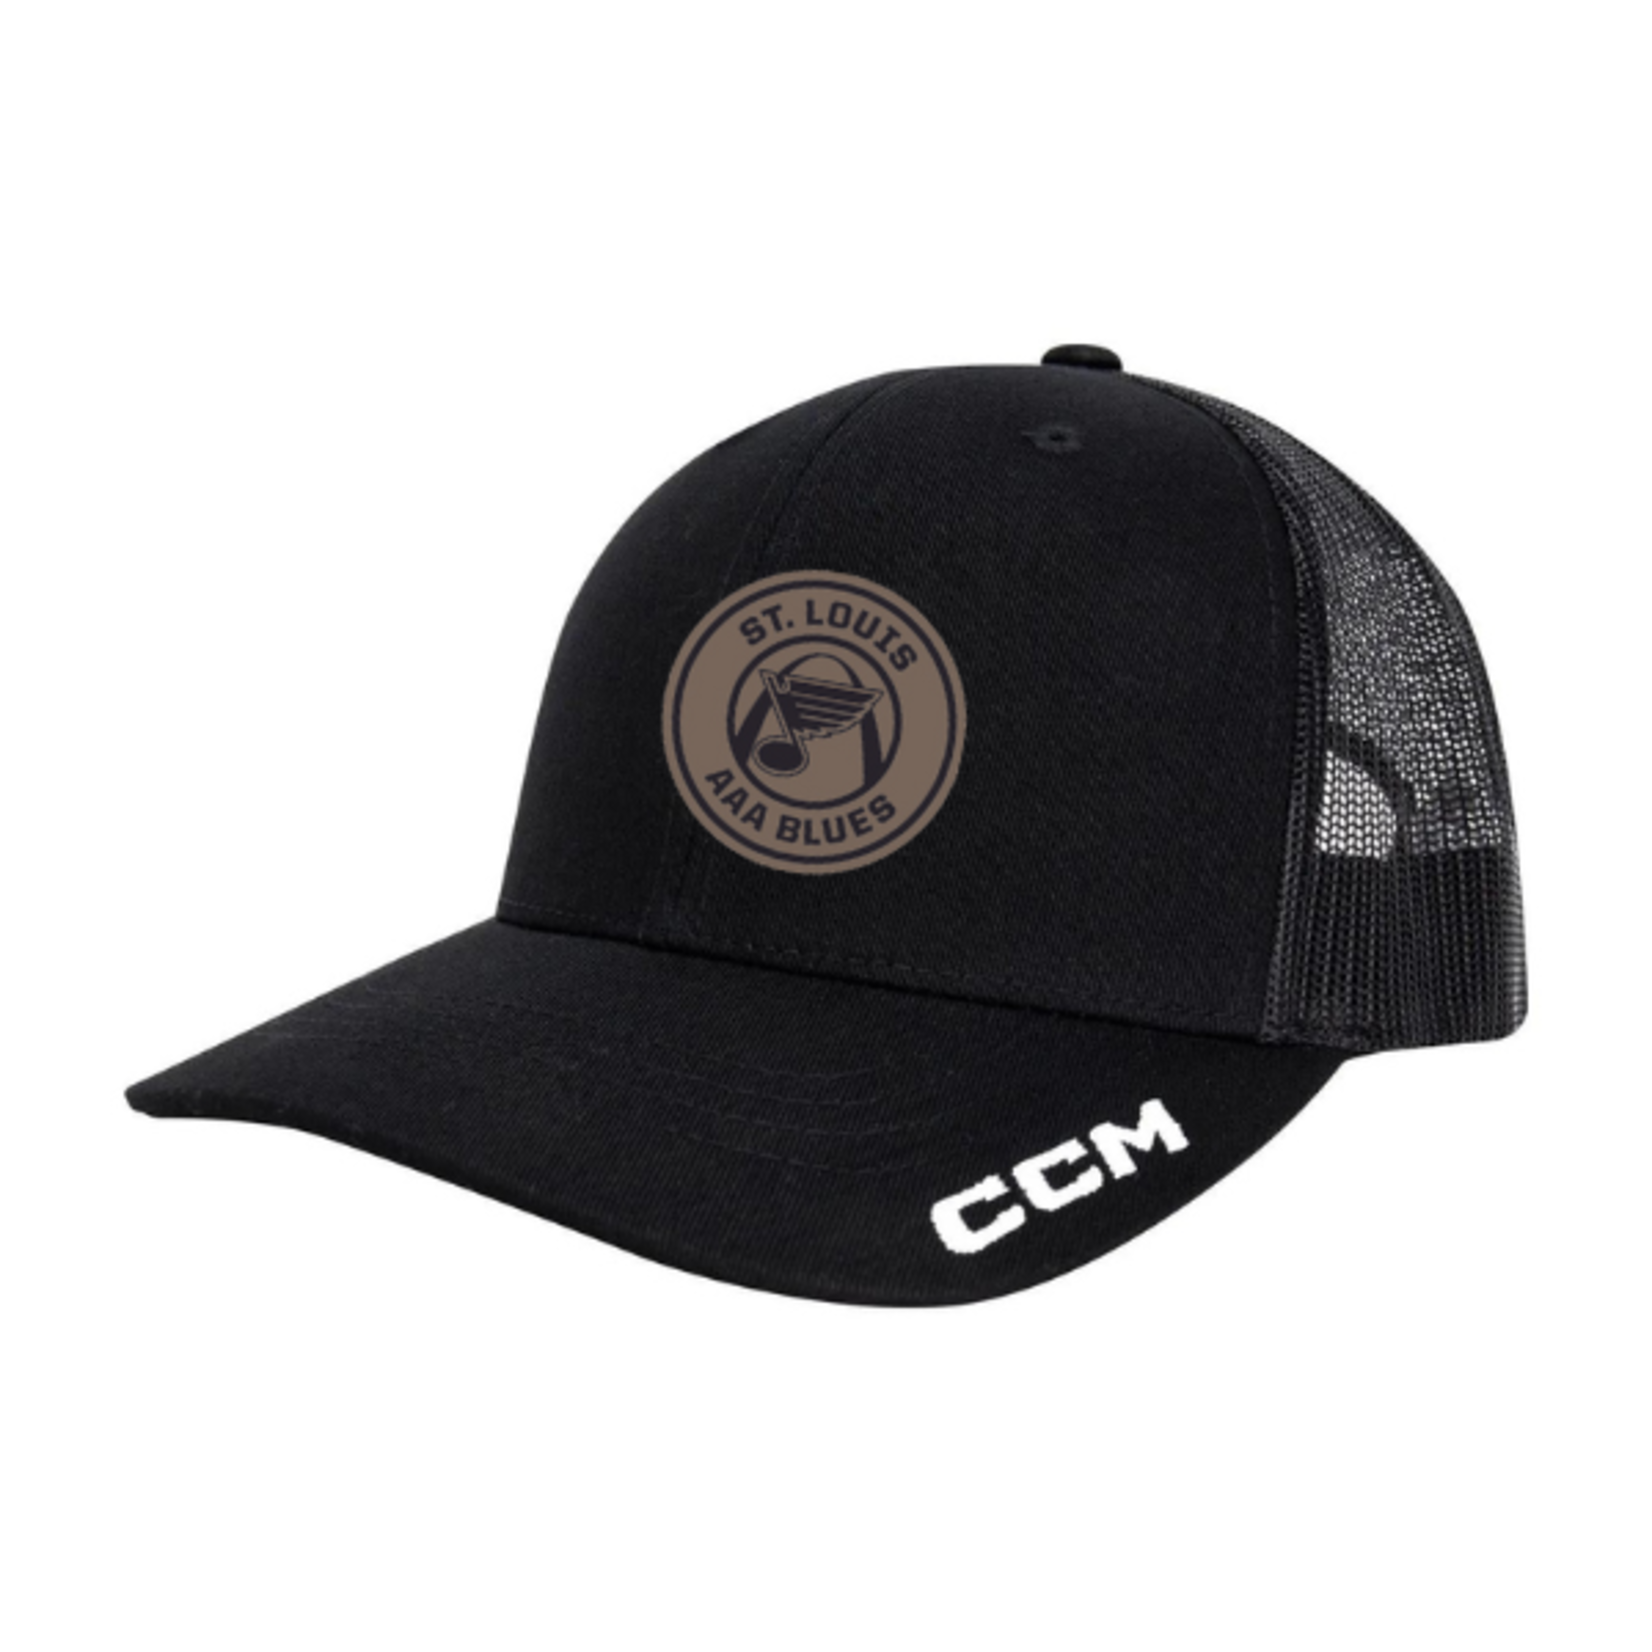 CCM AAA Blues CCM Leather Patch Trucker Hat (BLACK) YOUTH